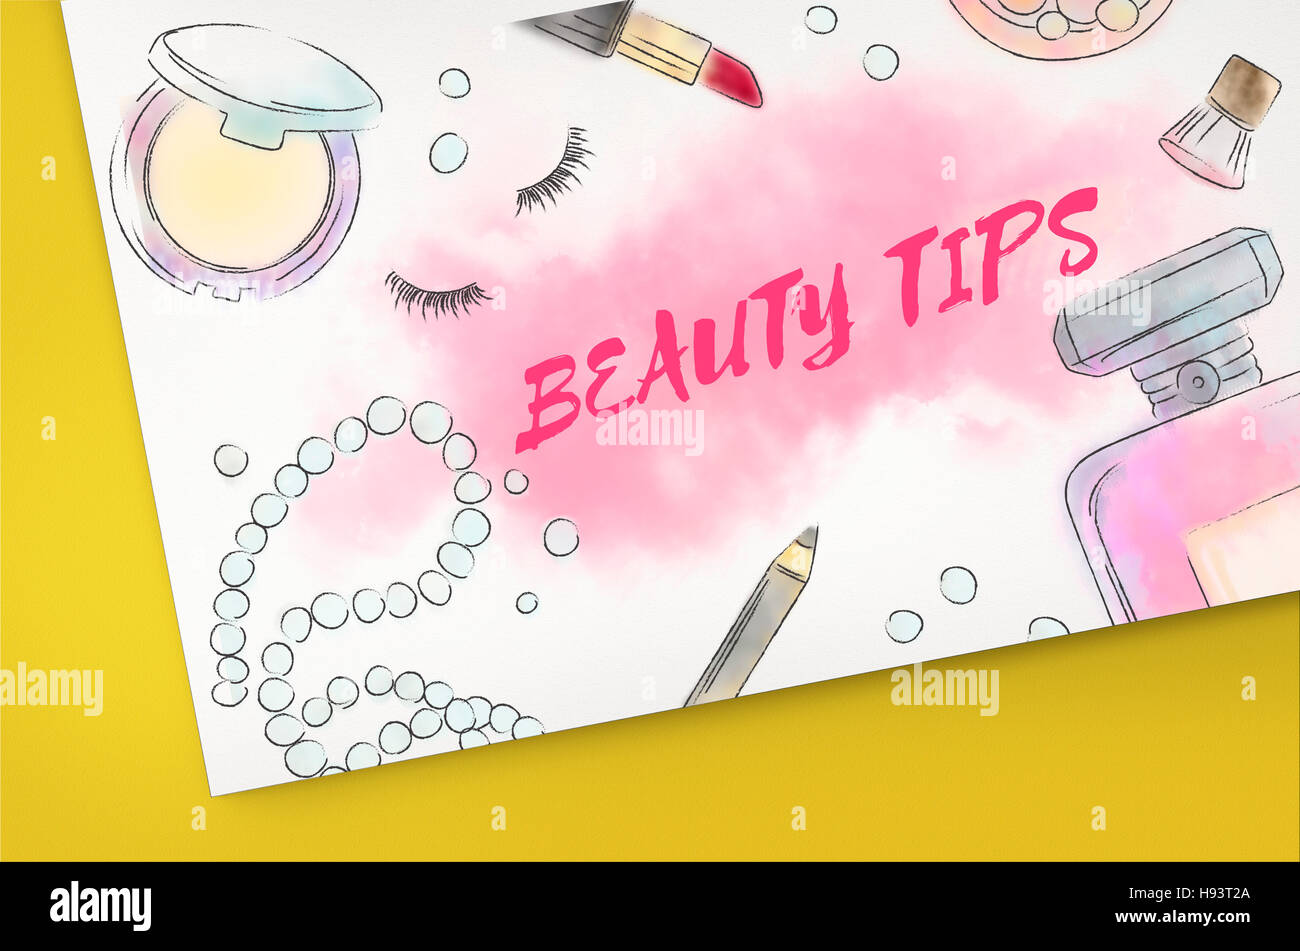 Beauty Tips Makeup Accessories Concept Stock Photo